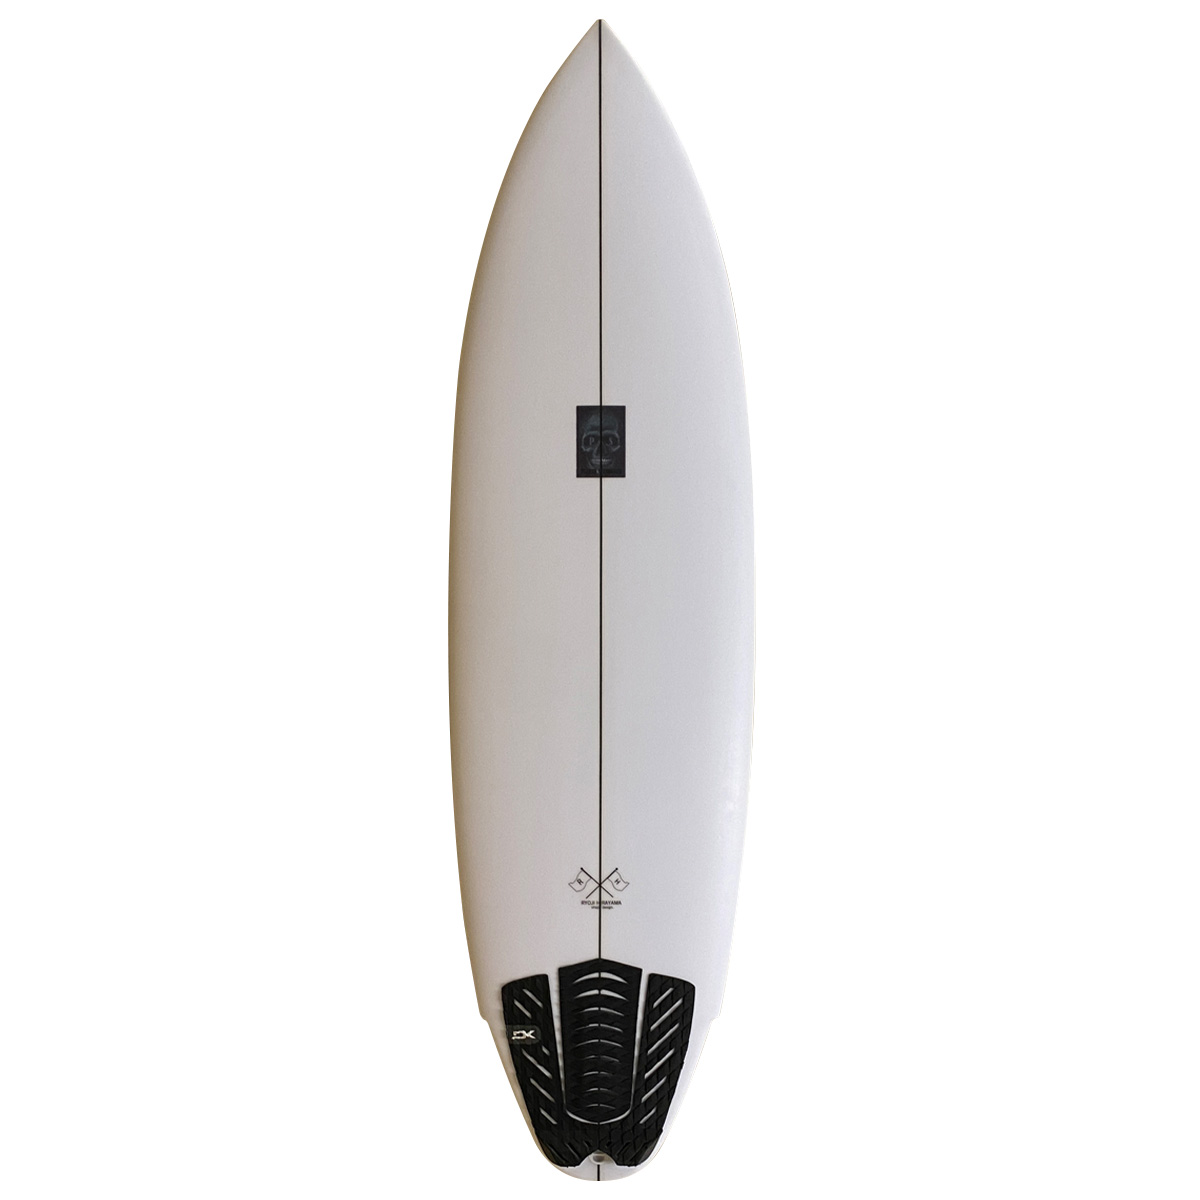 PEARTH SURFBOARD / PEARTH SURFBOARD / THE G.L.A.N.T 6`2